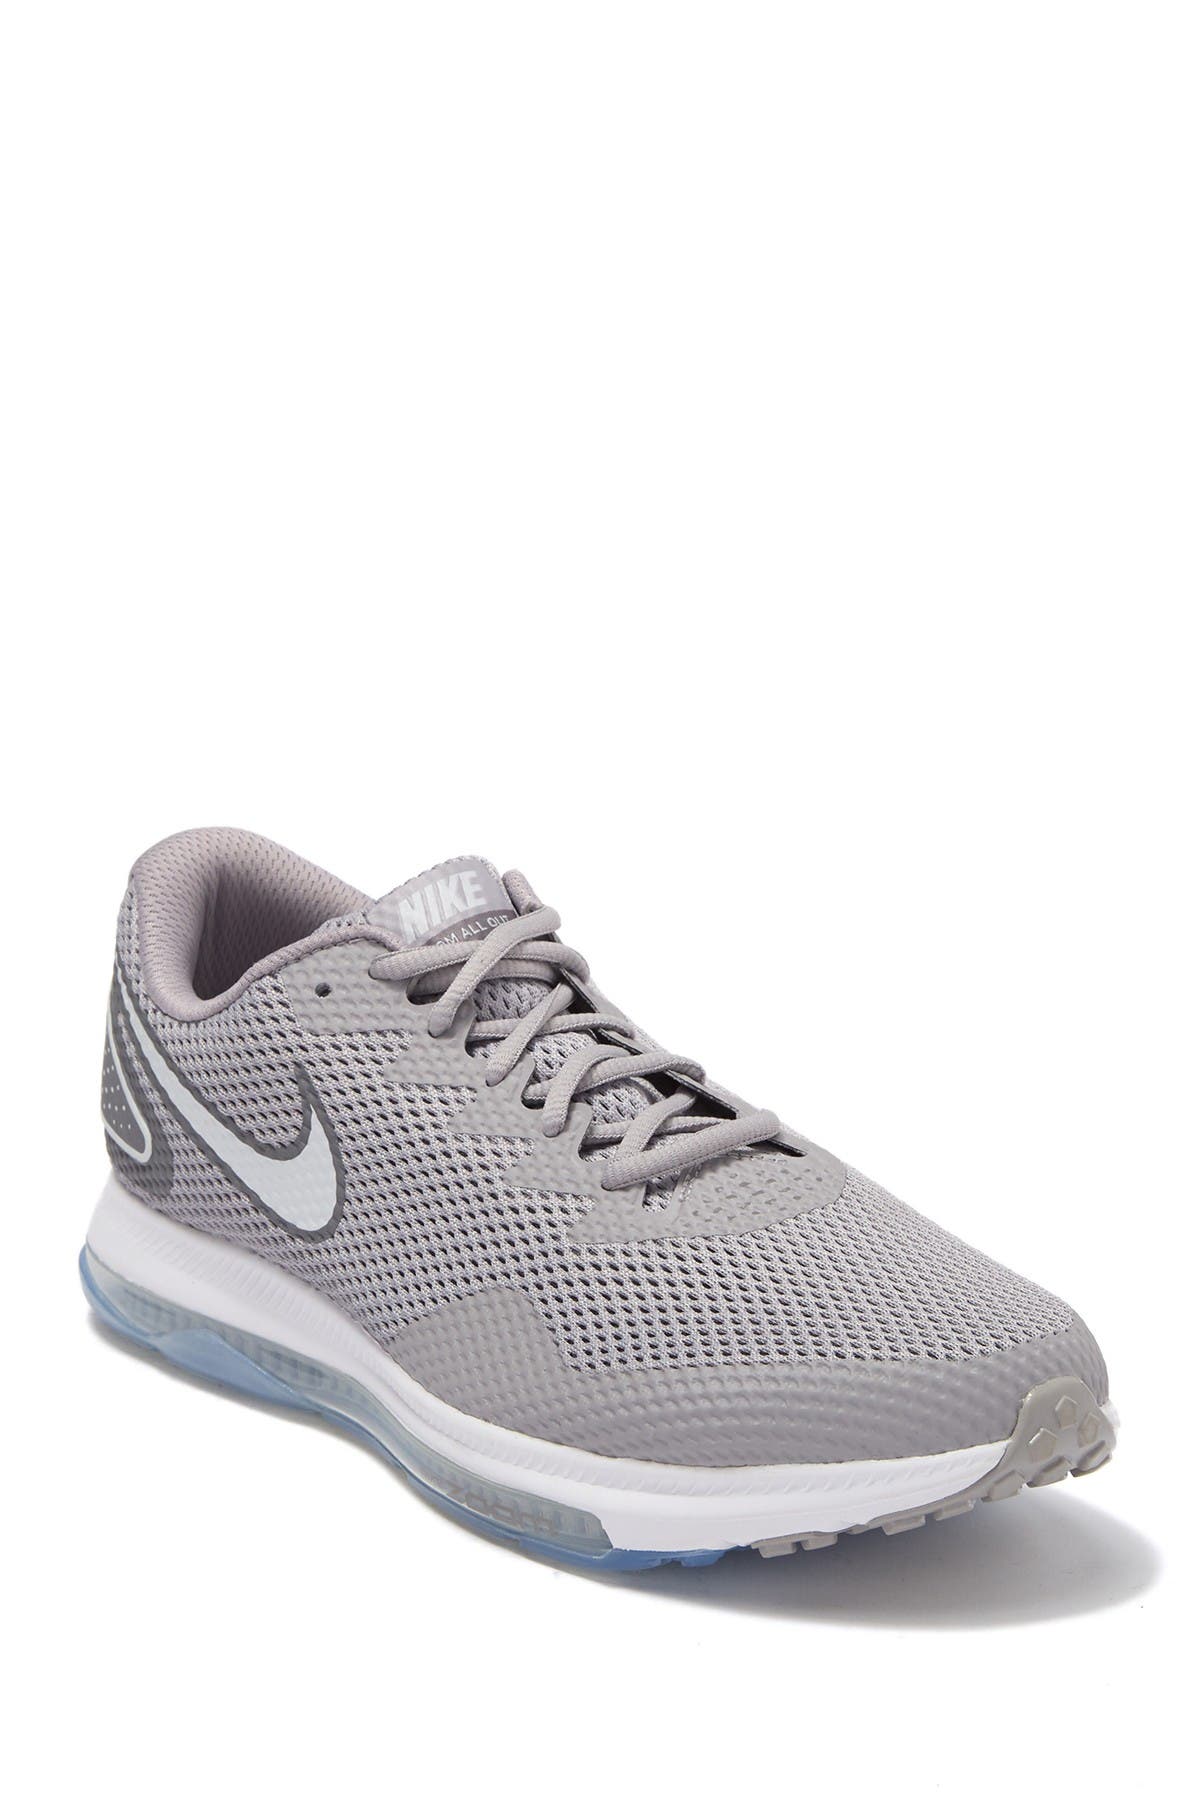 nike zoom all out amazon